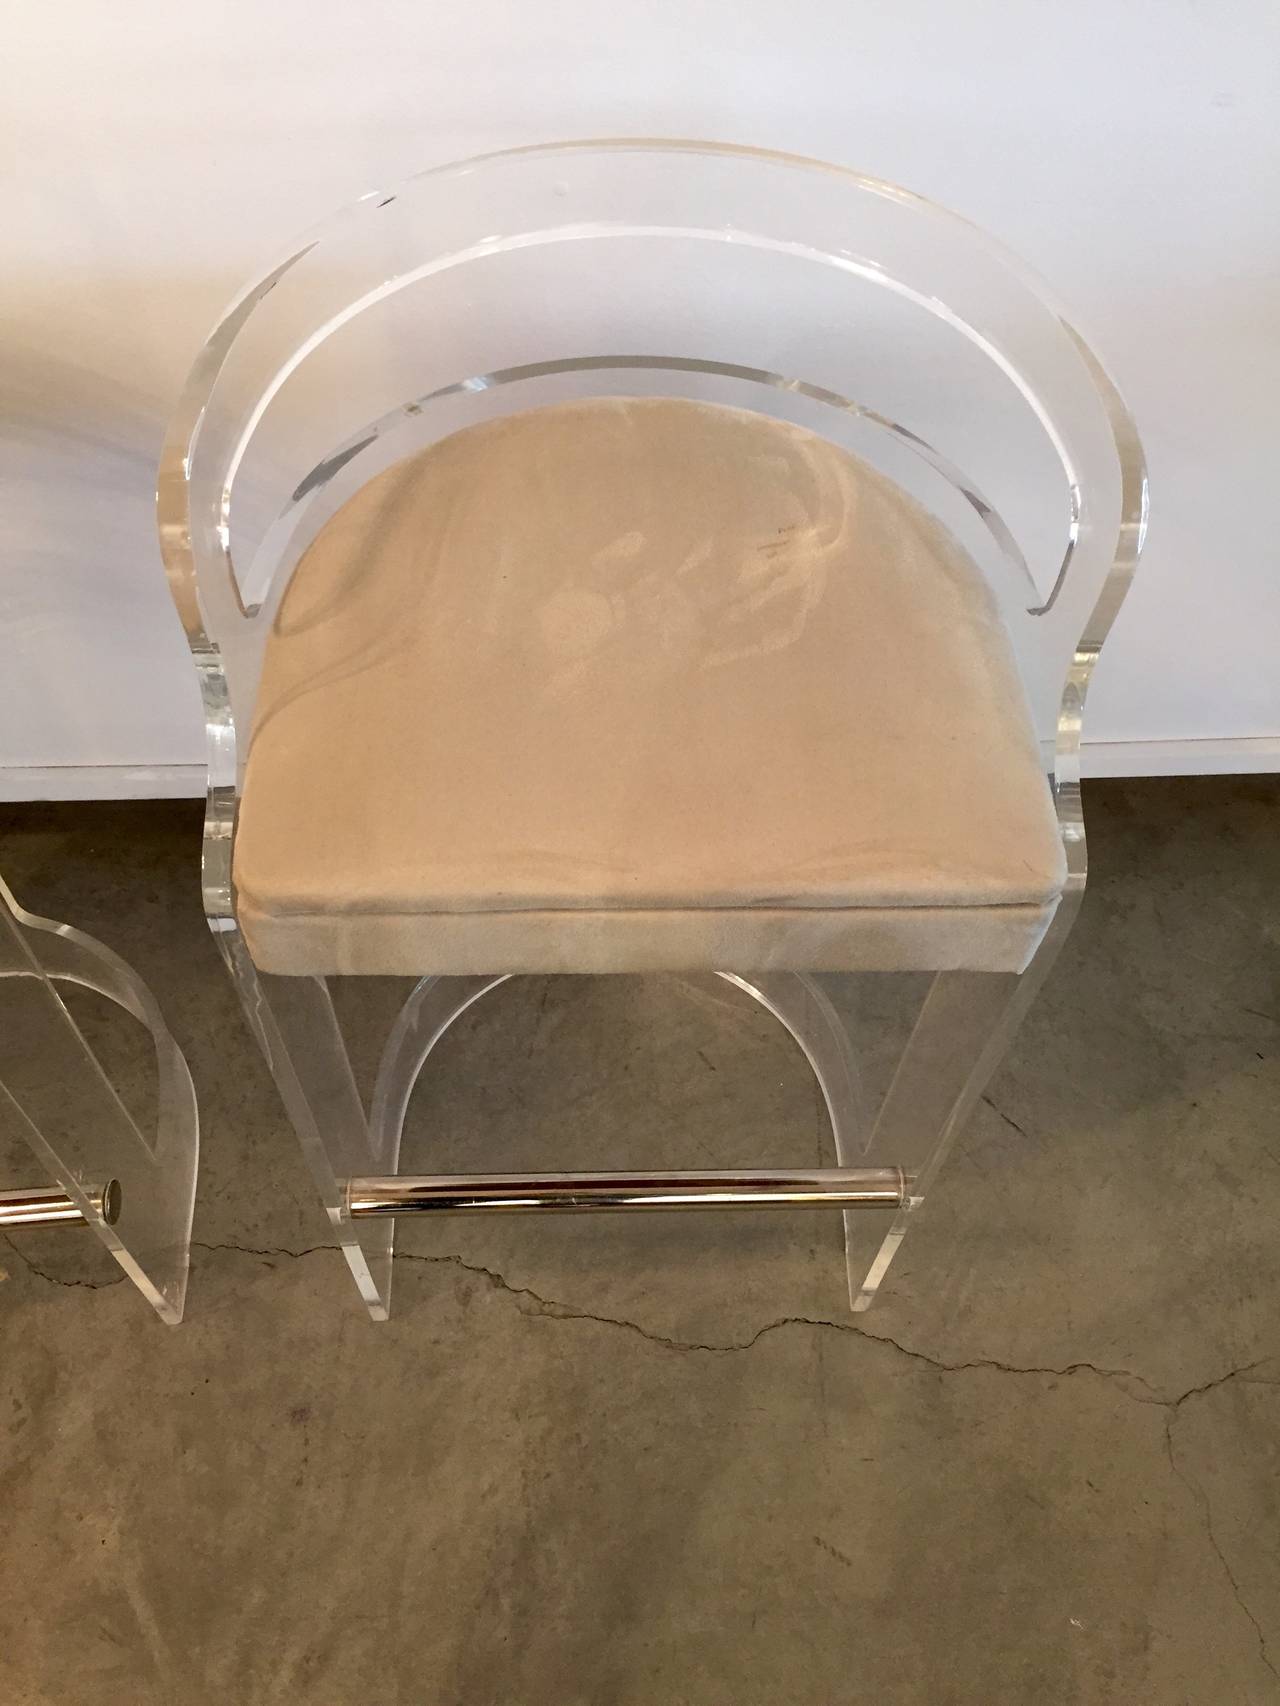 This pair of sculptural bar chairs designed by the grandfather of Lucite, Charles Hollis Jones, is a stunning example of his originality in combining metals with Lucite to produce an elegant yet very comfortable conversation piece that can fit with